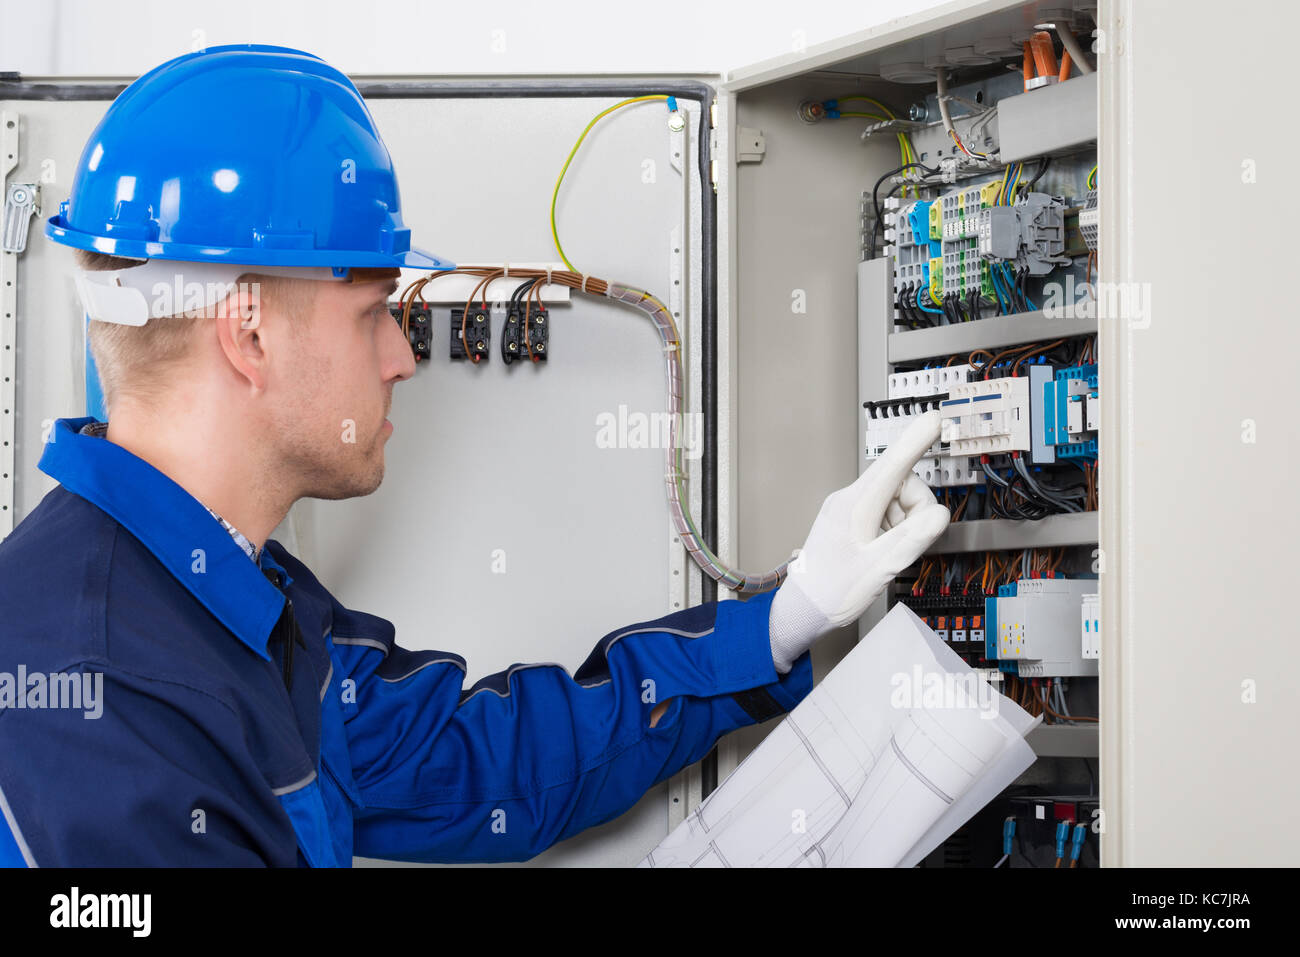 Male Electrician Testing Fusebox With Blueprint In Hand Stock Photo